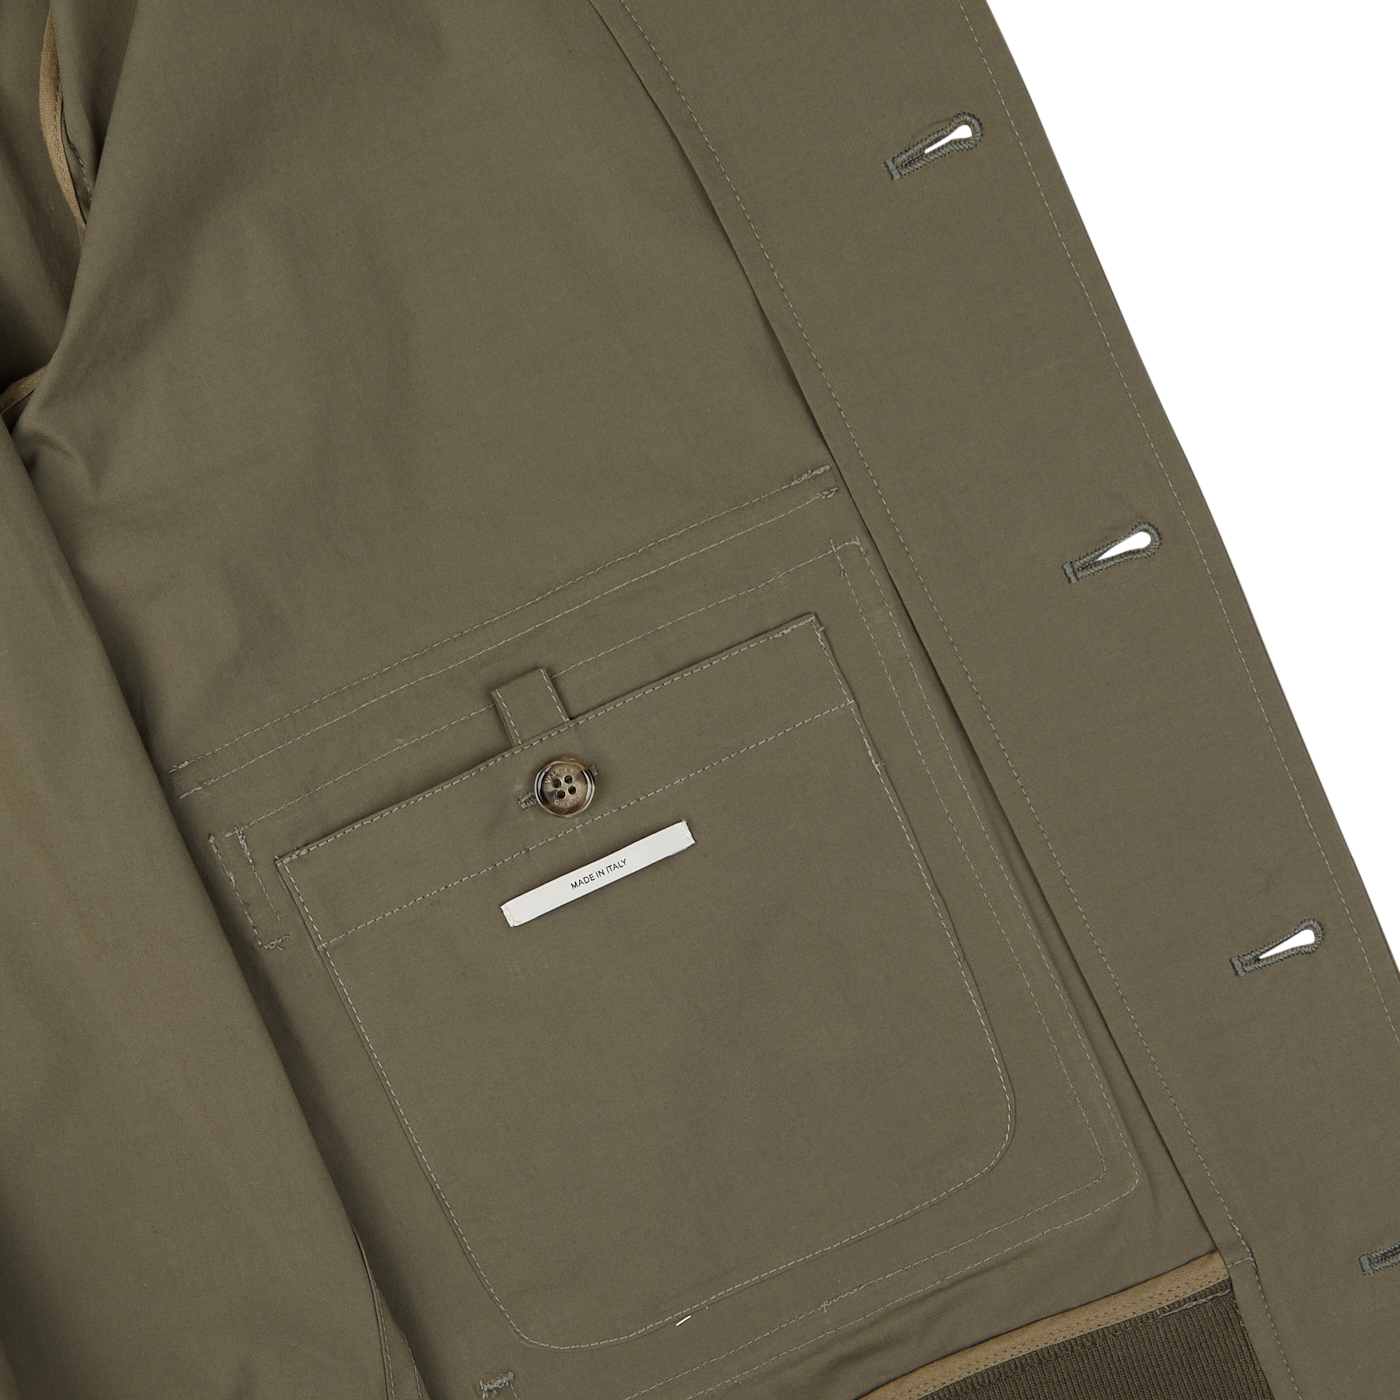 Valstar Olive Green Cotton Ripstop Valstarino Jacket with detailed stitching and buttoned pocket.